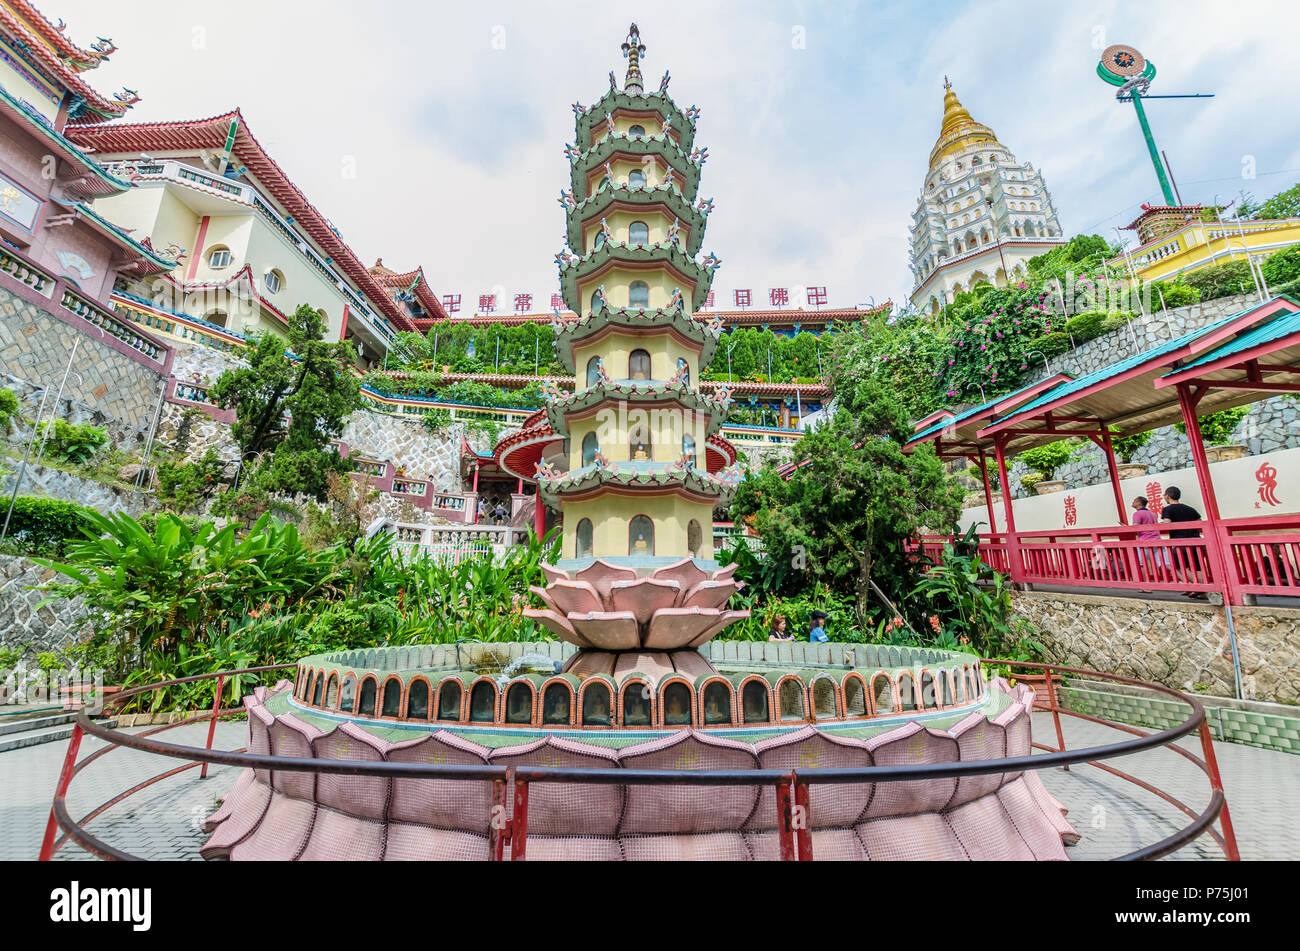 Penang,Malaysia - July 19,2015 : Kek Lok Si temple a Buddhist temple situated in Air Itam in Penang.It is one of the best known temples on the island. Stock Photo